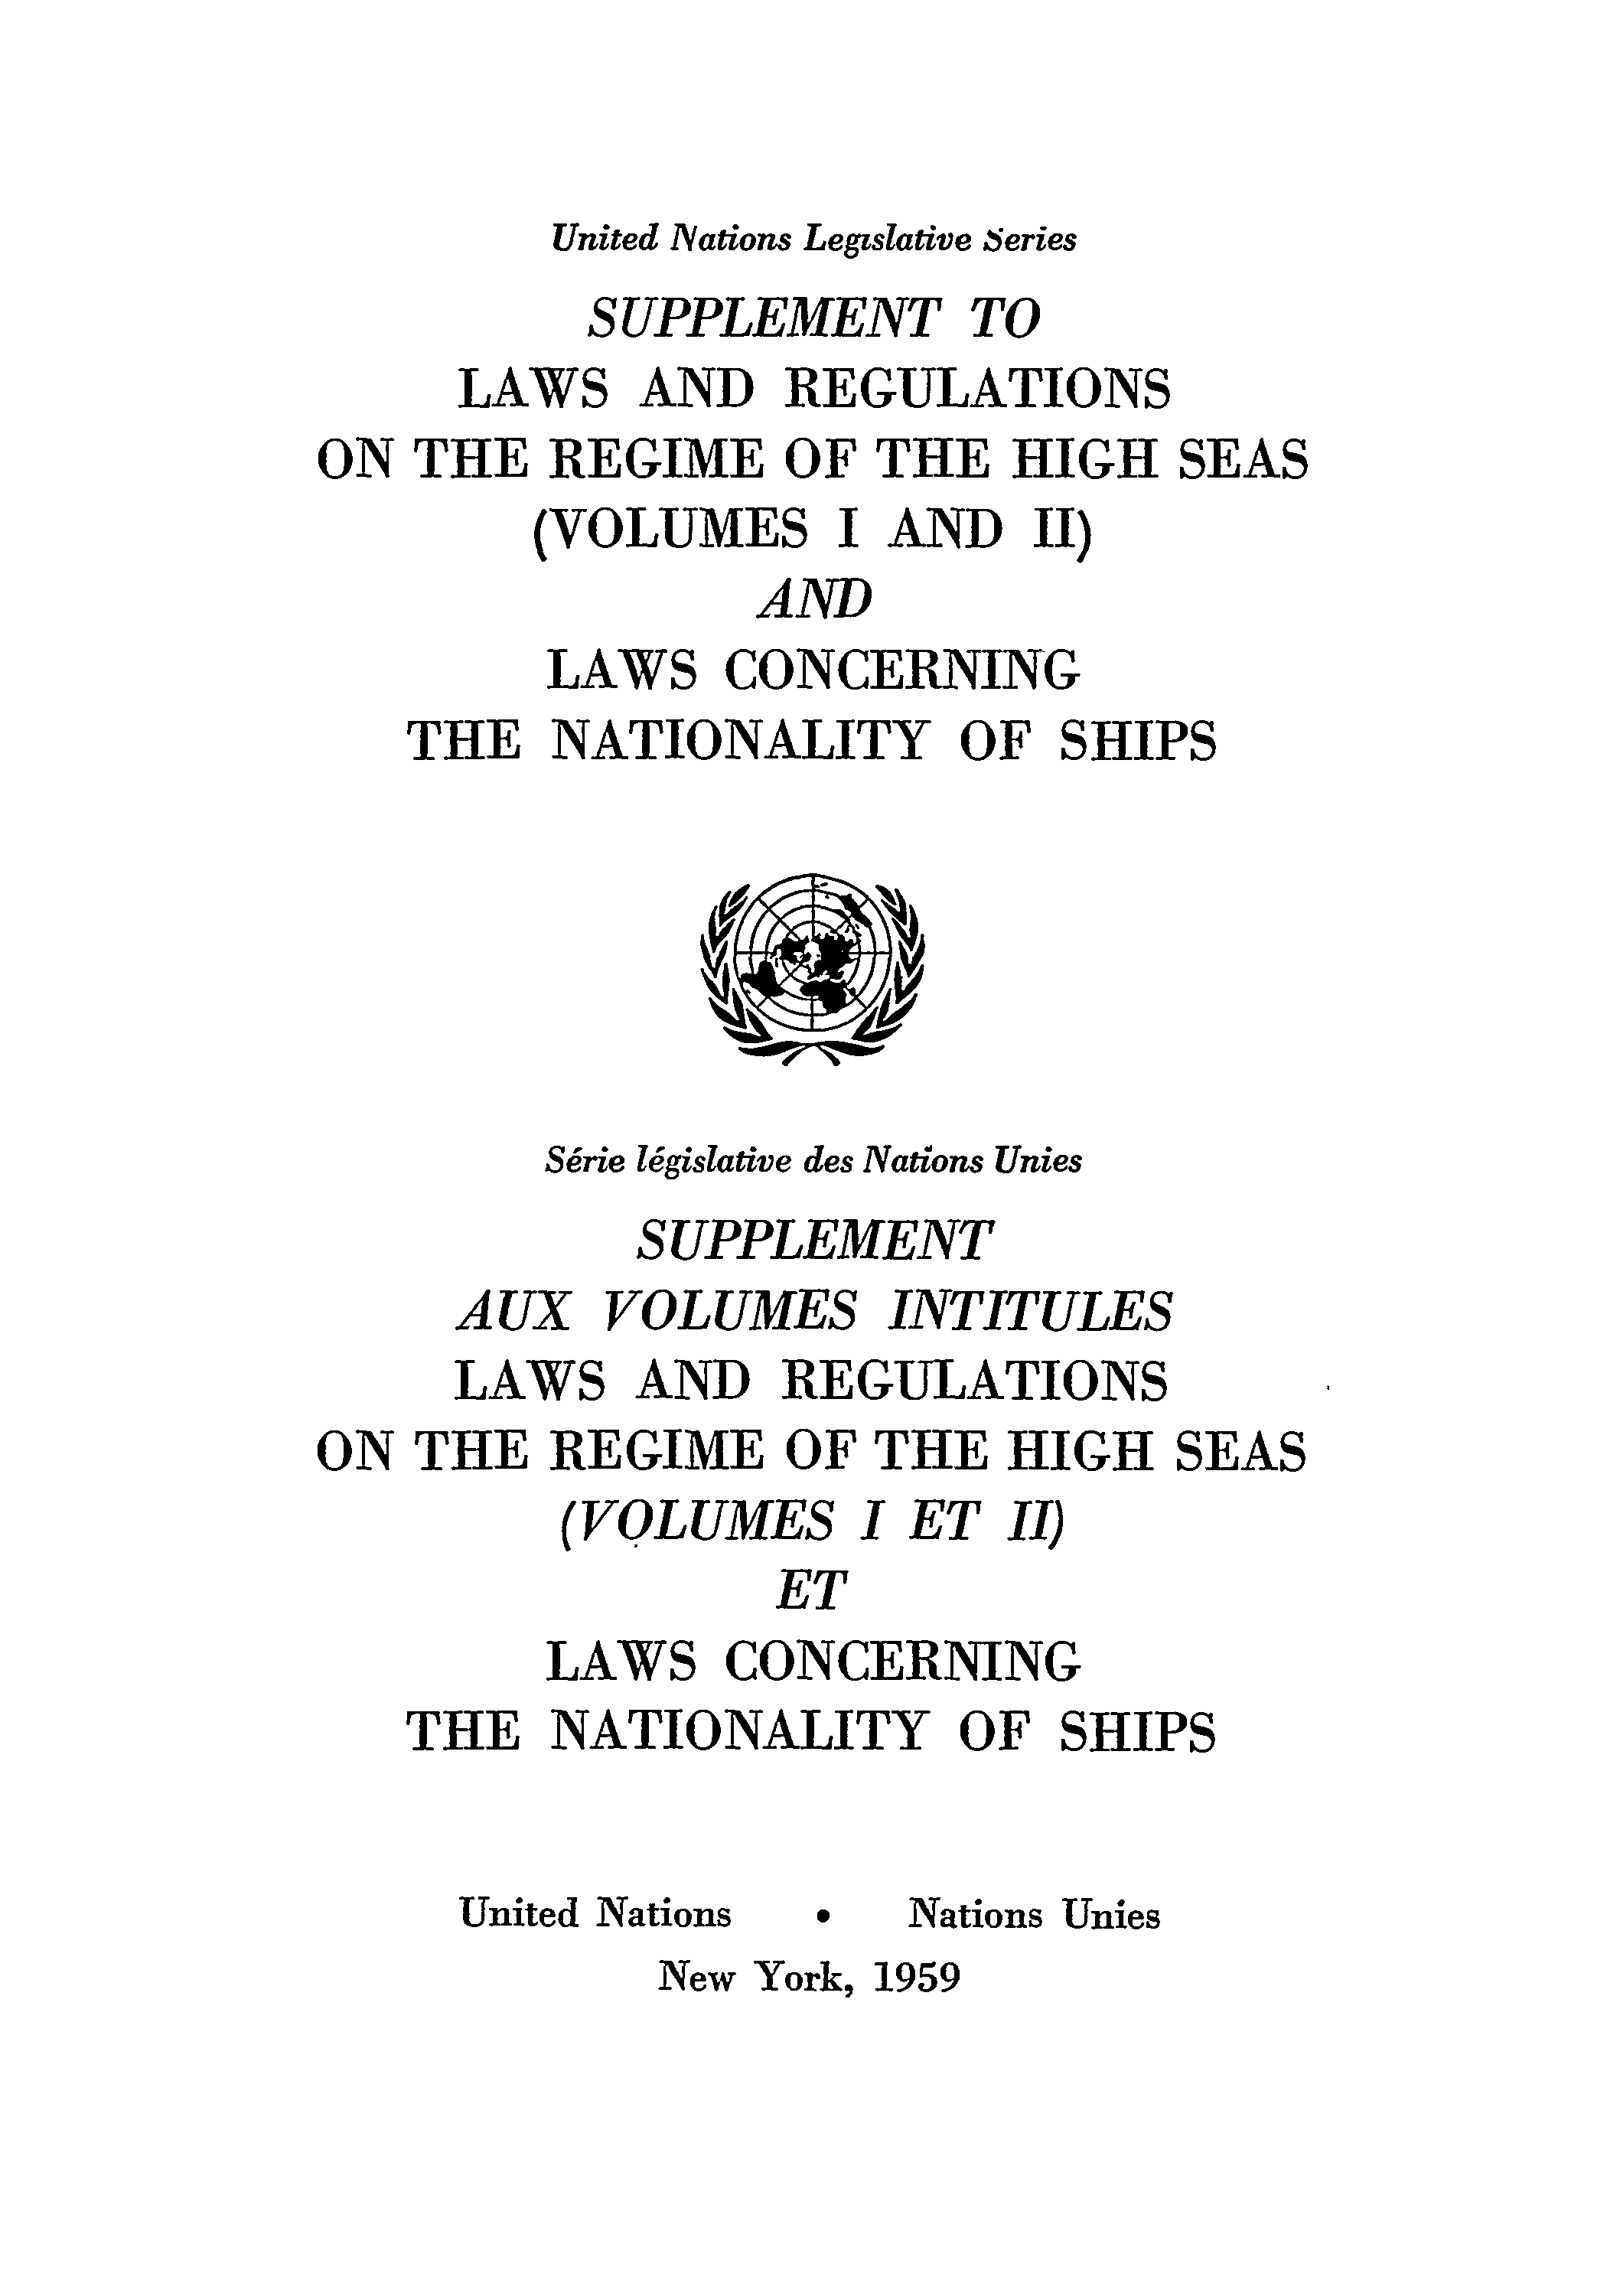 image of Supplement to Laws and Regulations on the Regime of the High Seas (Volumes I & II) and Laws Concerning the Nationality of Ships